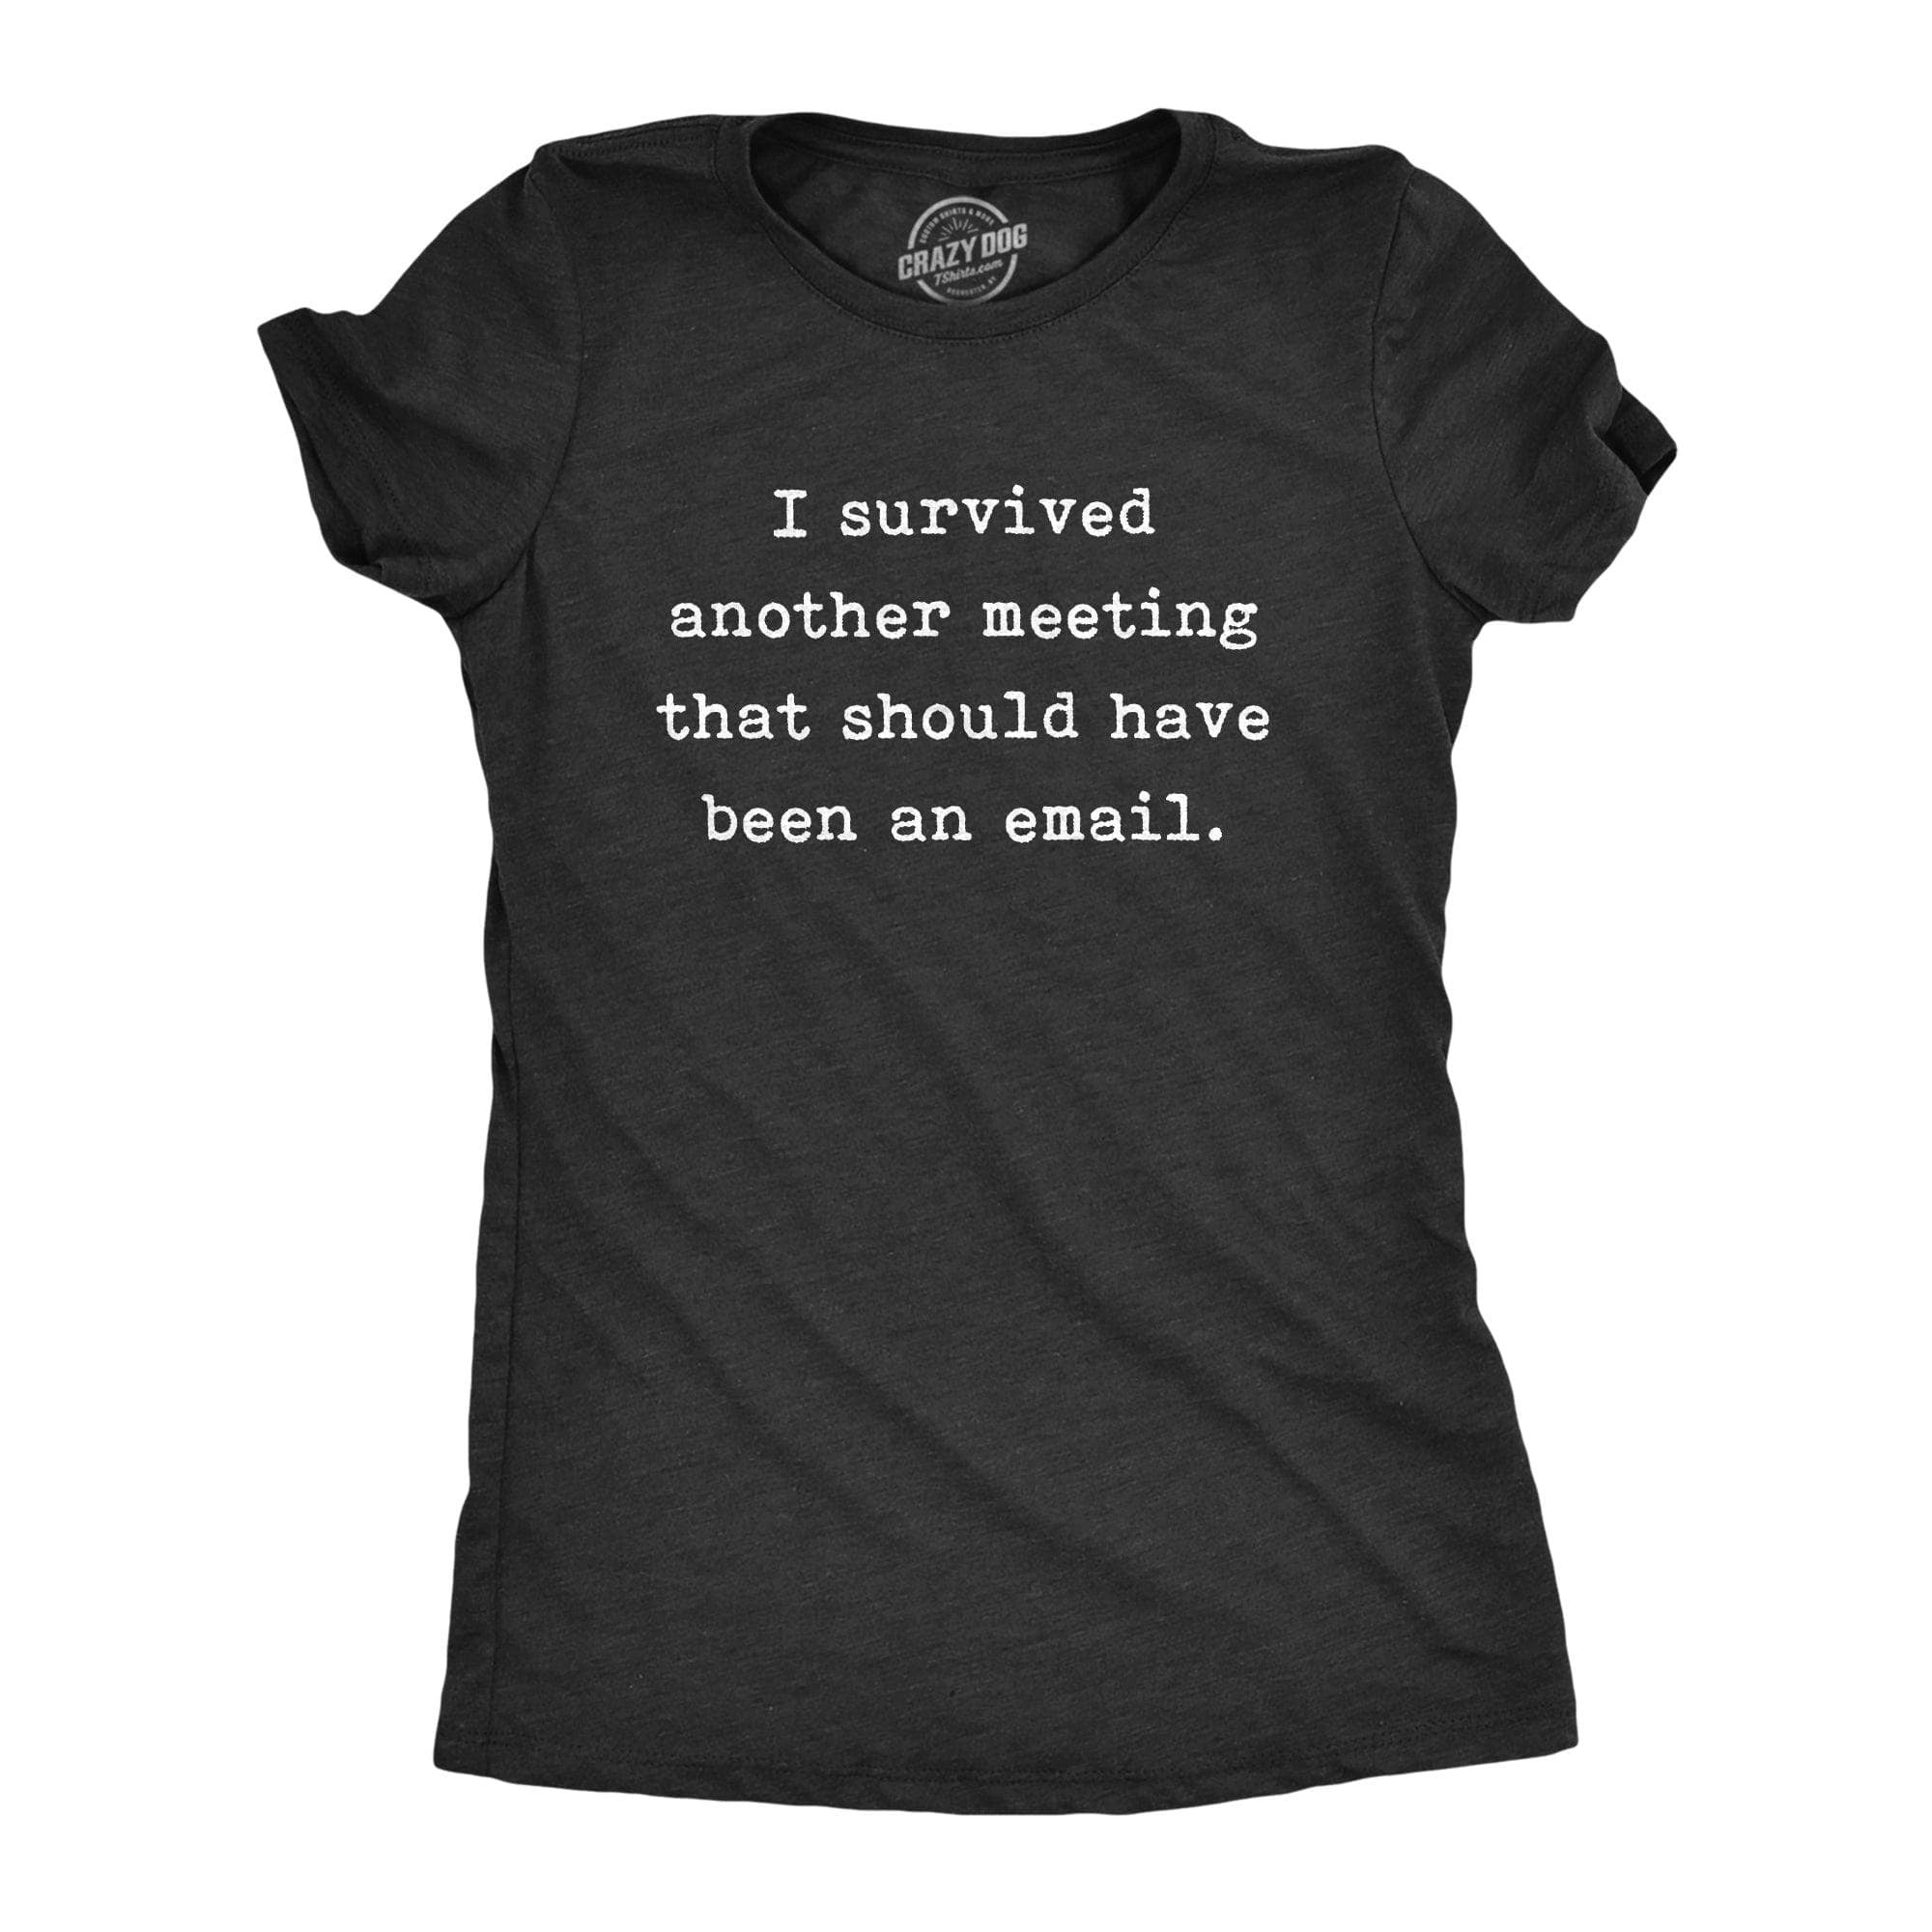 Another Meeting That Should Have Been An Email Women's Tshirt  -  Crazy Dog T-Shirts